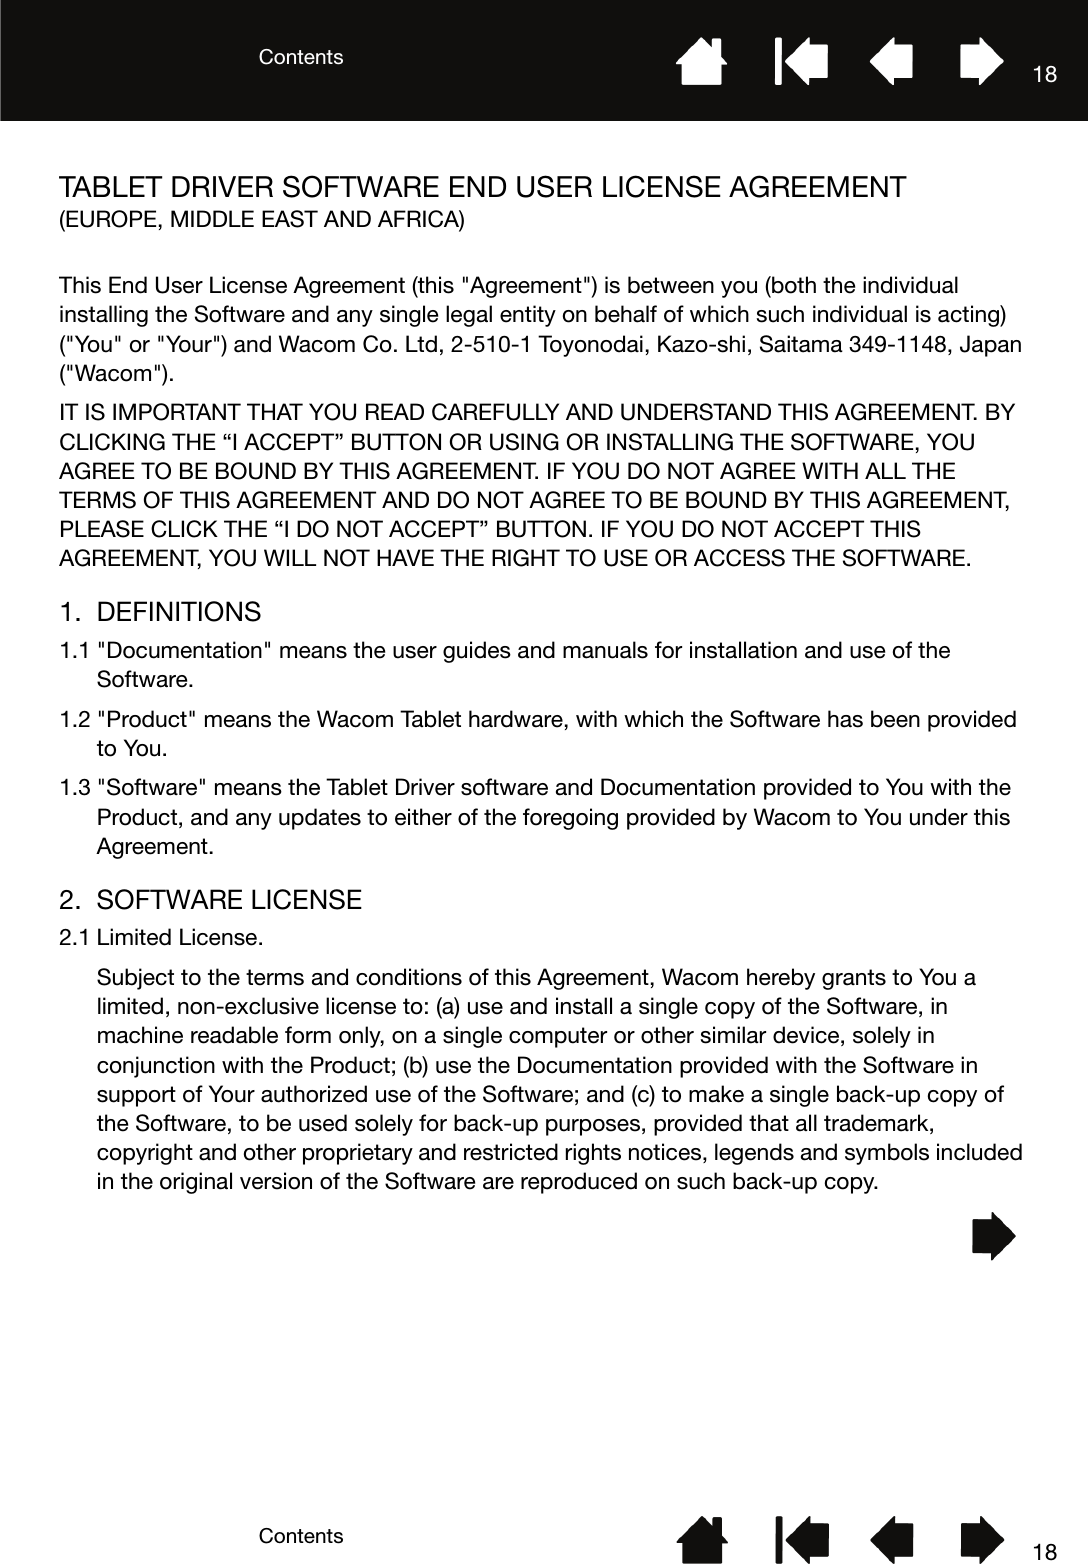 ContentsContents 1818TABLET DRIVER SOFTWARE END USER LICENSE AGREEMENT(EUROPE, MIDDLE EAST AND AFRICA)This End User License Agreement (this &quot;Agreement&quot;) is between you (both the individual installing the Software and any single legal entity on behalf of which such individual is acting) (&quot;You&quot; or &quot;Your&quot;) and Wacom Co. Ltd, 2-510-1 Toyonodai, Kazo-shi, Saitama 349-1148, Japan (&quot;Wacom&quot;). IT IS IMPORTANT THAT YOU READ CAREFULLY AND UNDERSTAND THIS AGREEMENT. BY CLICKING THE “I ACCEPT” BUTTON OR USING OR INSTALLING THE SOFTWARE, YOU AGREE TO BE BOUND BY THIS AGREEMENT. IF YOU DO NOT AGREE WITH ALL THE TERMS OF THIS AGREEMENT AND DO NOT AGREE TO BE BOUND BY THIS AGREEMENT, PLEASE CLICK THE “I DO NOT ACCEPT” BUTTON. IF YOU DO NOT ACCEPT THIS AGREEMENT, YOU WILL NOT HAVE THE RIGHT TO USE OR ACCESS THE SOFTWARE.1. DEFINITIONS1.1 &quot;Documentation&quot; means the user guides and manuals for installation and use of the Software. 1.2 &quot;Product&quot; means the Wacom Tablet hardware, with which the Software has been provided to You. 1.3 &quot;Software&quot; means the Tablet Driver software and Documentation provided to You with the Product, and any updates to either of the foregoing provided by Wacom to You under this Agreement.2. SOFTWARE LICENSE2.1 Limited License.Subject to the terms and conditions of this Agreement, Wacom hereby grants to You a limited, non-exclusive license to: (a) use and install a single copy of the Software, in machine readable form only, on a single computer or other similar device, solely in conjunction with the Product; (b) use the Documentation provided with the Software in support of Your authorized use of the Software; and (c) to make a single back-up copy of the Software, to be used solely for back-up purposes, provided that all trademark, copyright and other proprietary and restricted rights notices, legends and symbols included in the original version of the Software are reproduced on such back-up copy.